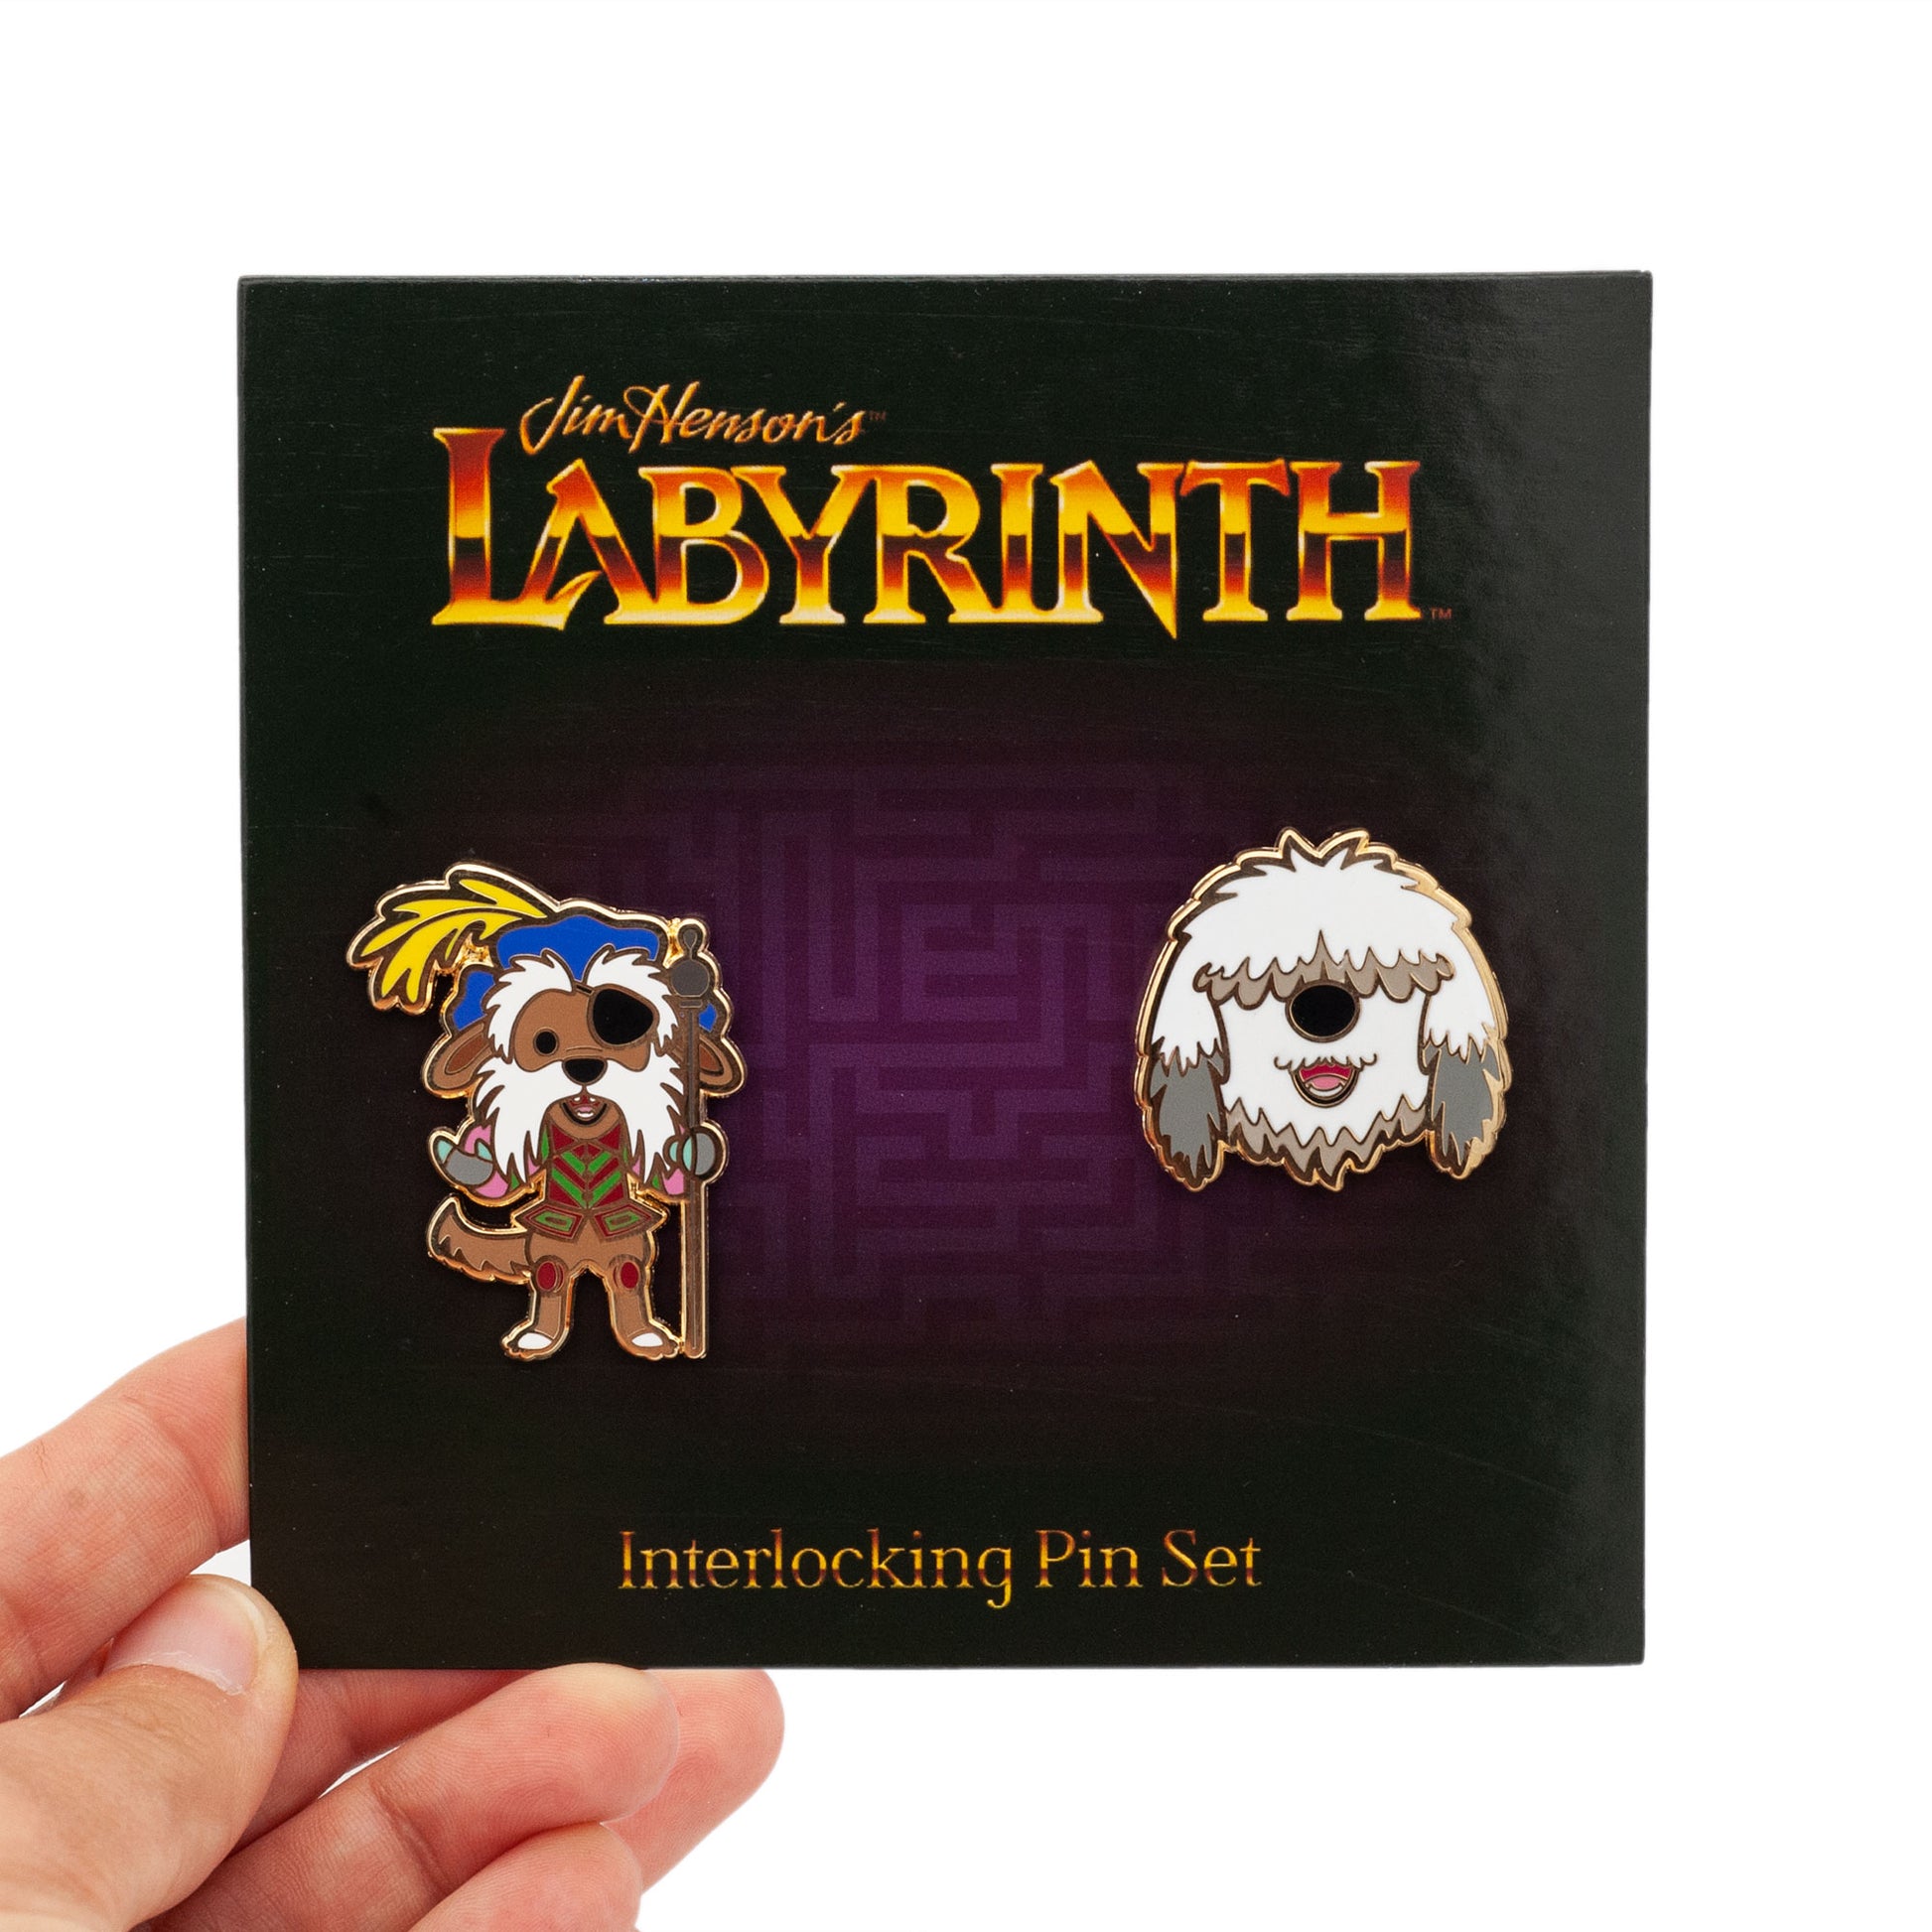 Illustration of sir didymus and ambrusious as pins! gold plated and can be worn together or separately. on purple Labyrinth backing card